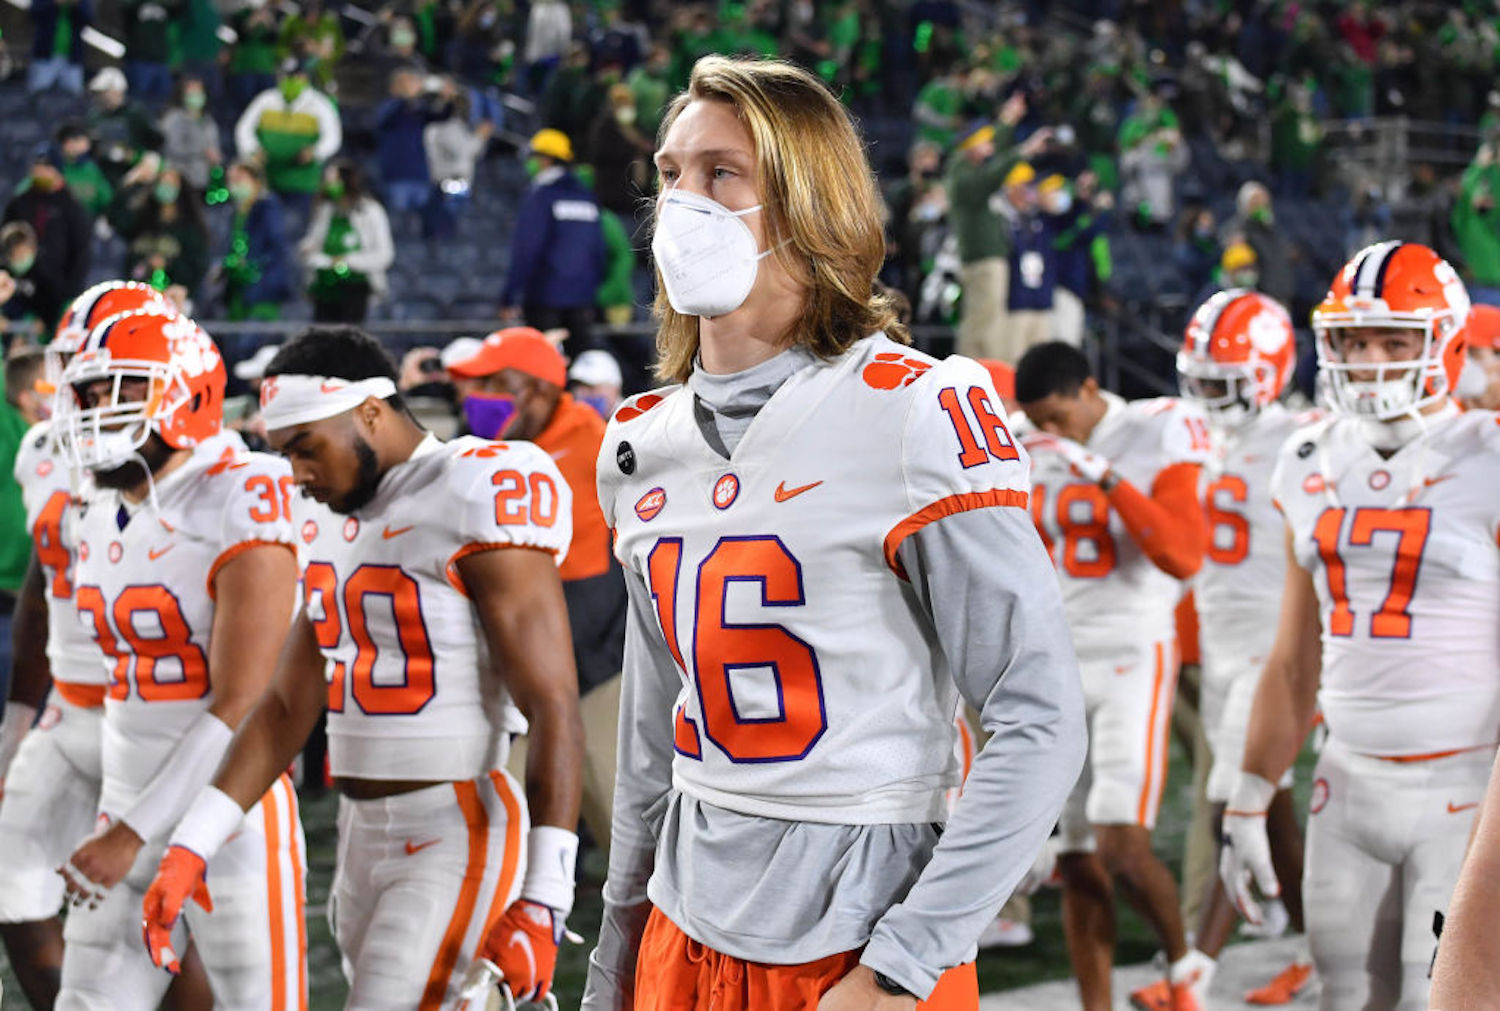 Can Clemson Still Make the College Football Playoff After Losing to Notre Dame?